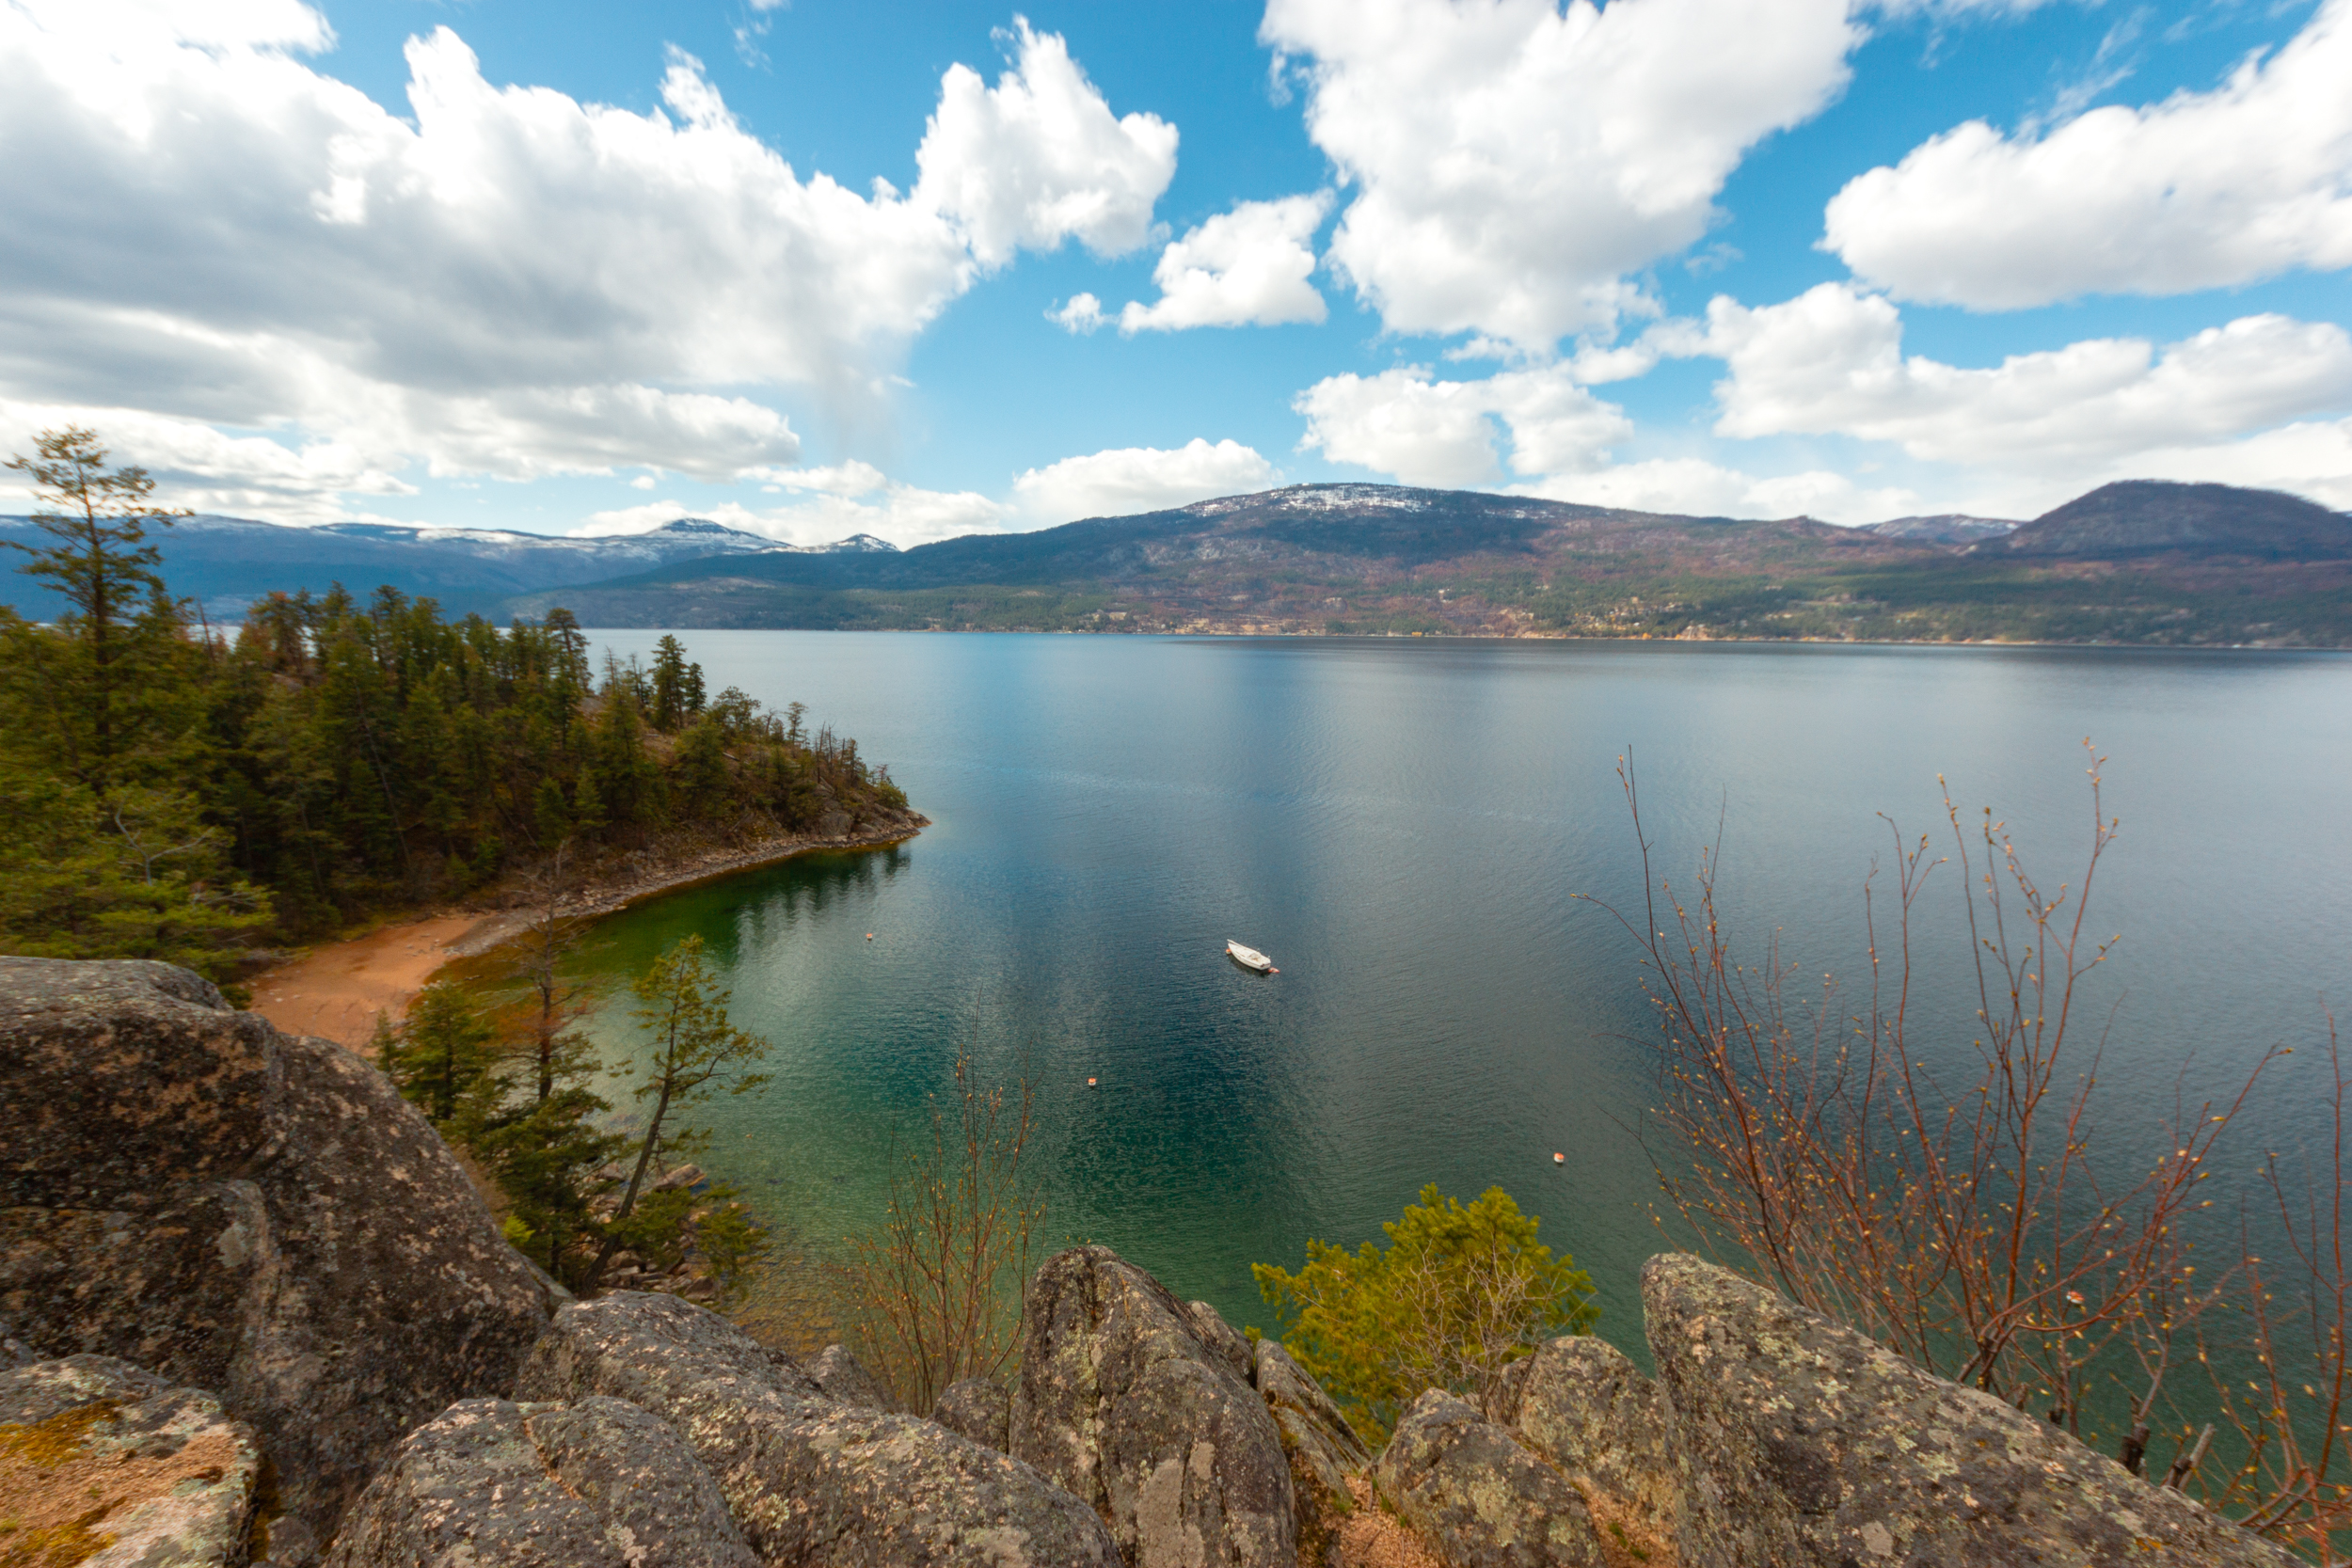 View from the headlands at Ellison Provincial Park, overlooking Okanagan Lake towards Fintry